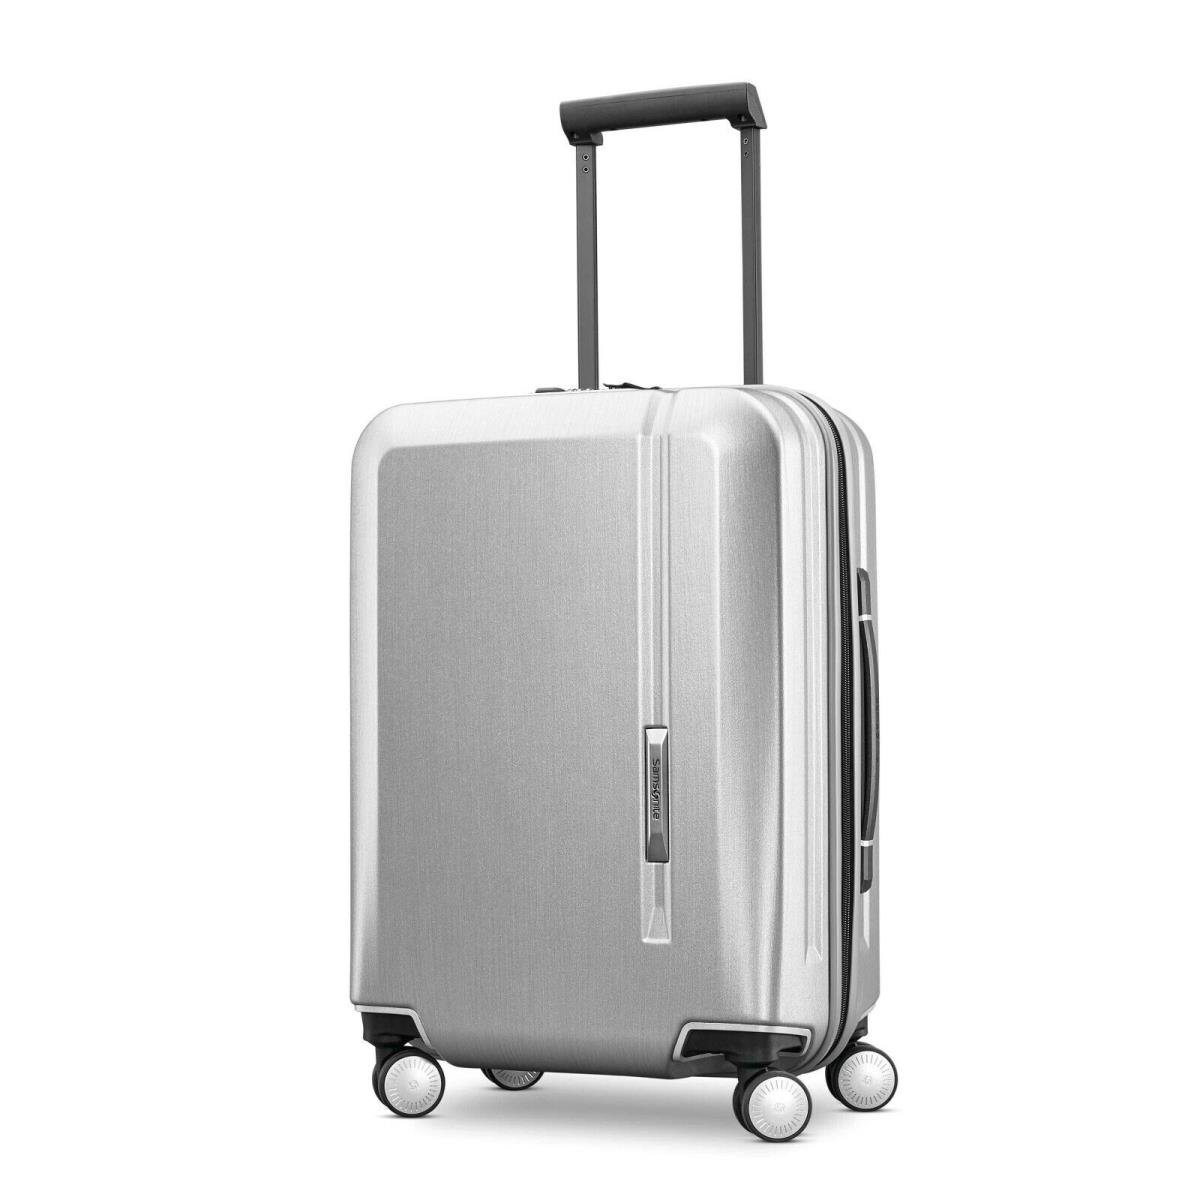 Samsonite Novaire 20 Carry-on 360 Spinner Trolley Wheel Luggage Travel Suitcase Silver